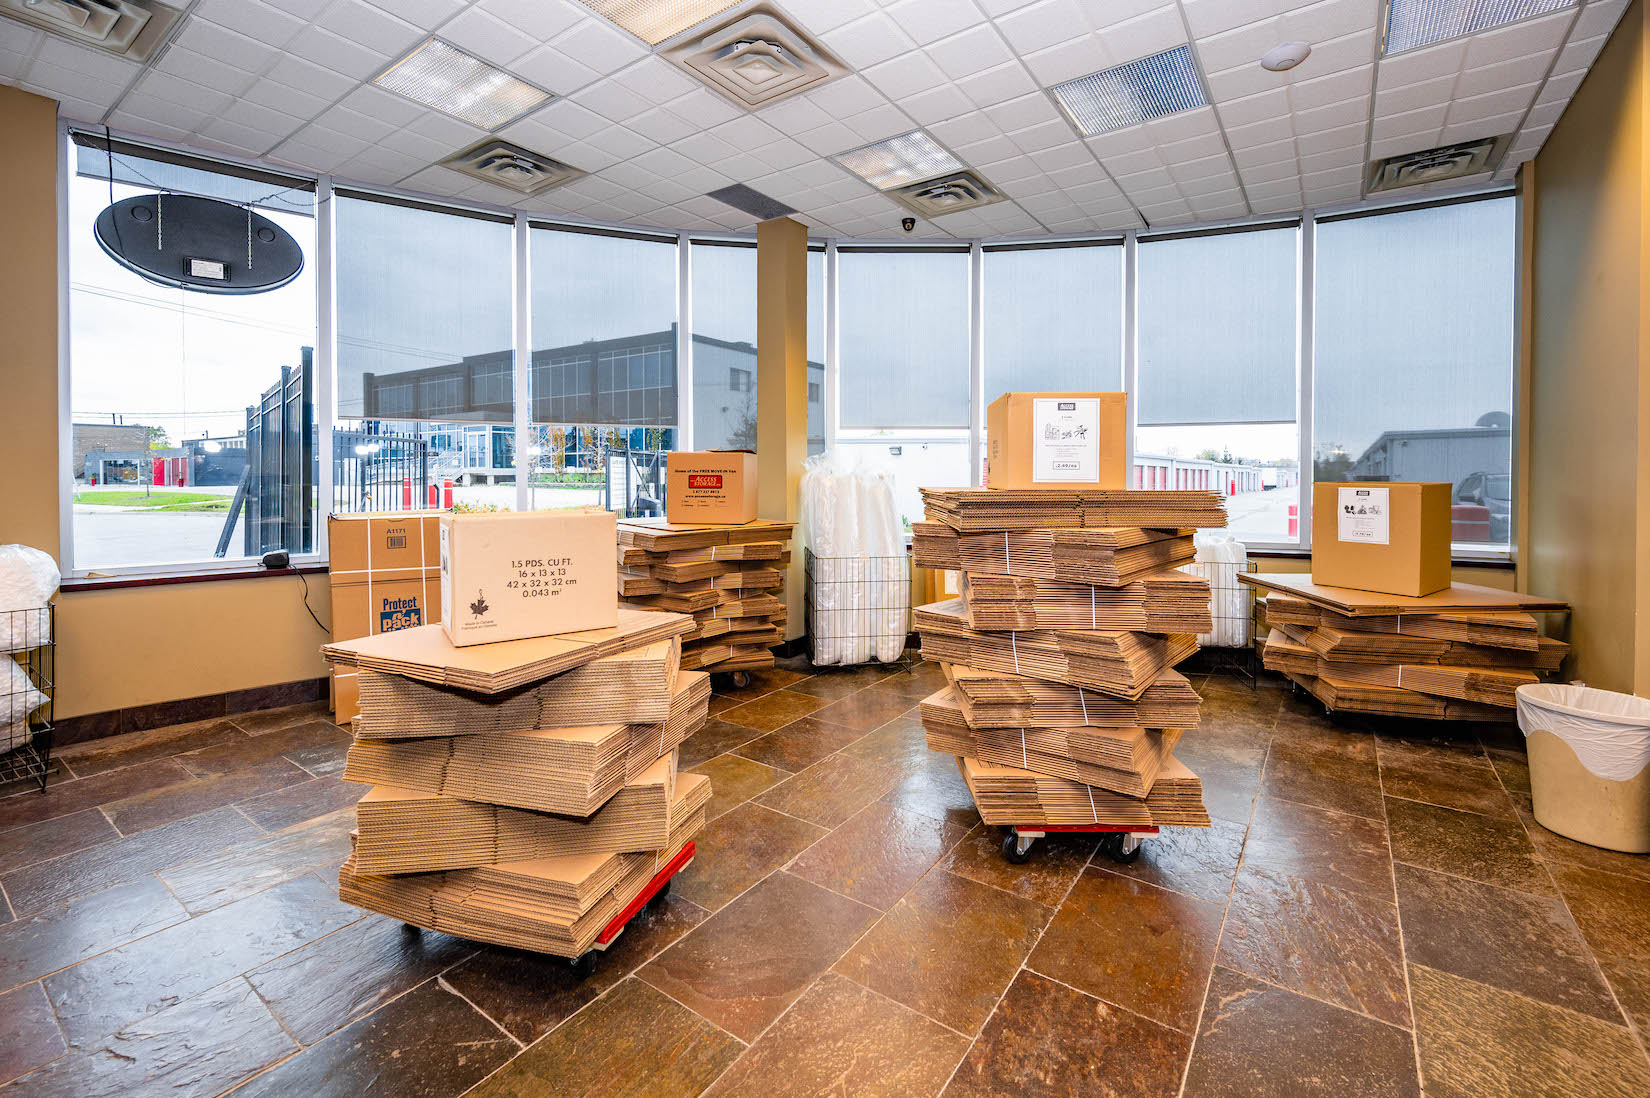 Images Access Storage - Yorkdale